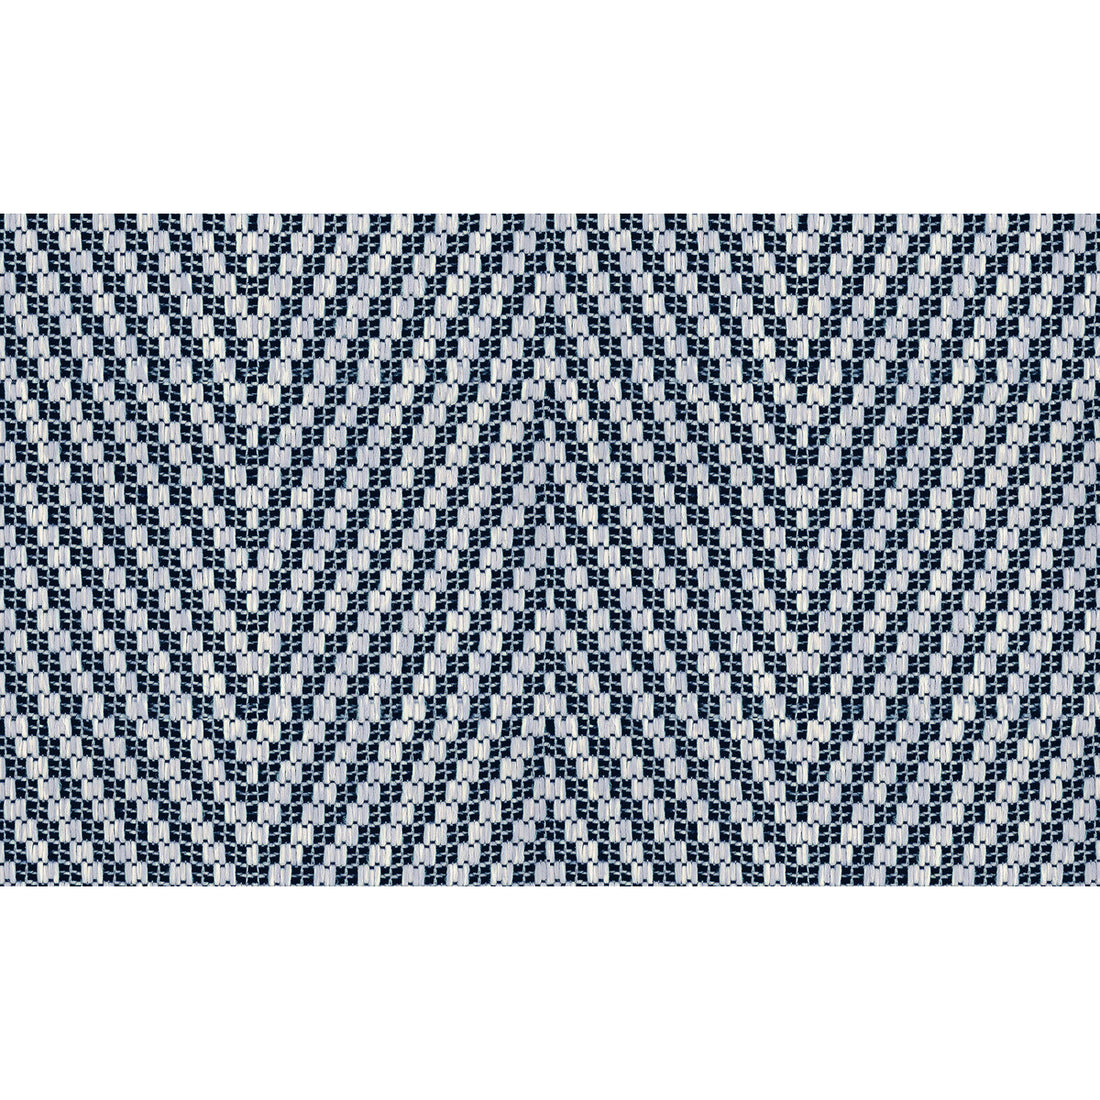 Kali Chevron fabric in indigo color - pattern 33495.50.0 - by Kravet Design in the Echo Indoor Outdoor Ibiza collection